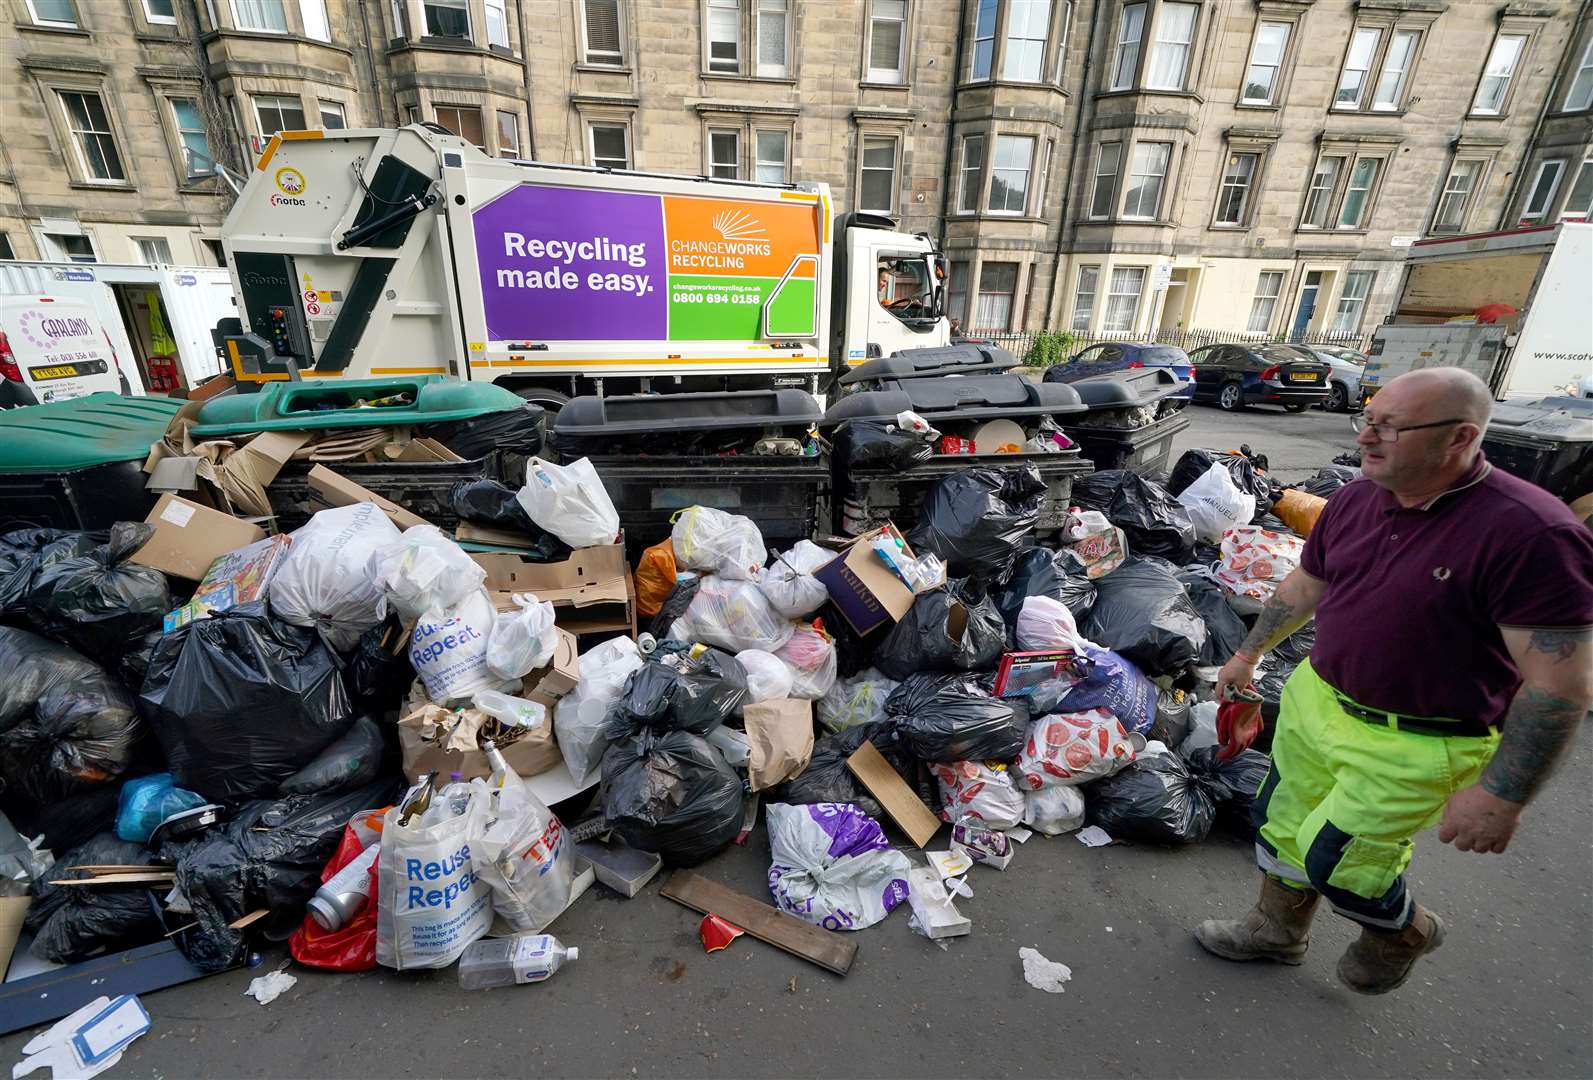 The strike action has seen rubbish overflow on to the streets of Scotland’s towns and cities (Andrew Milligan/PA)